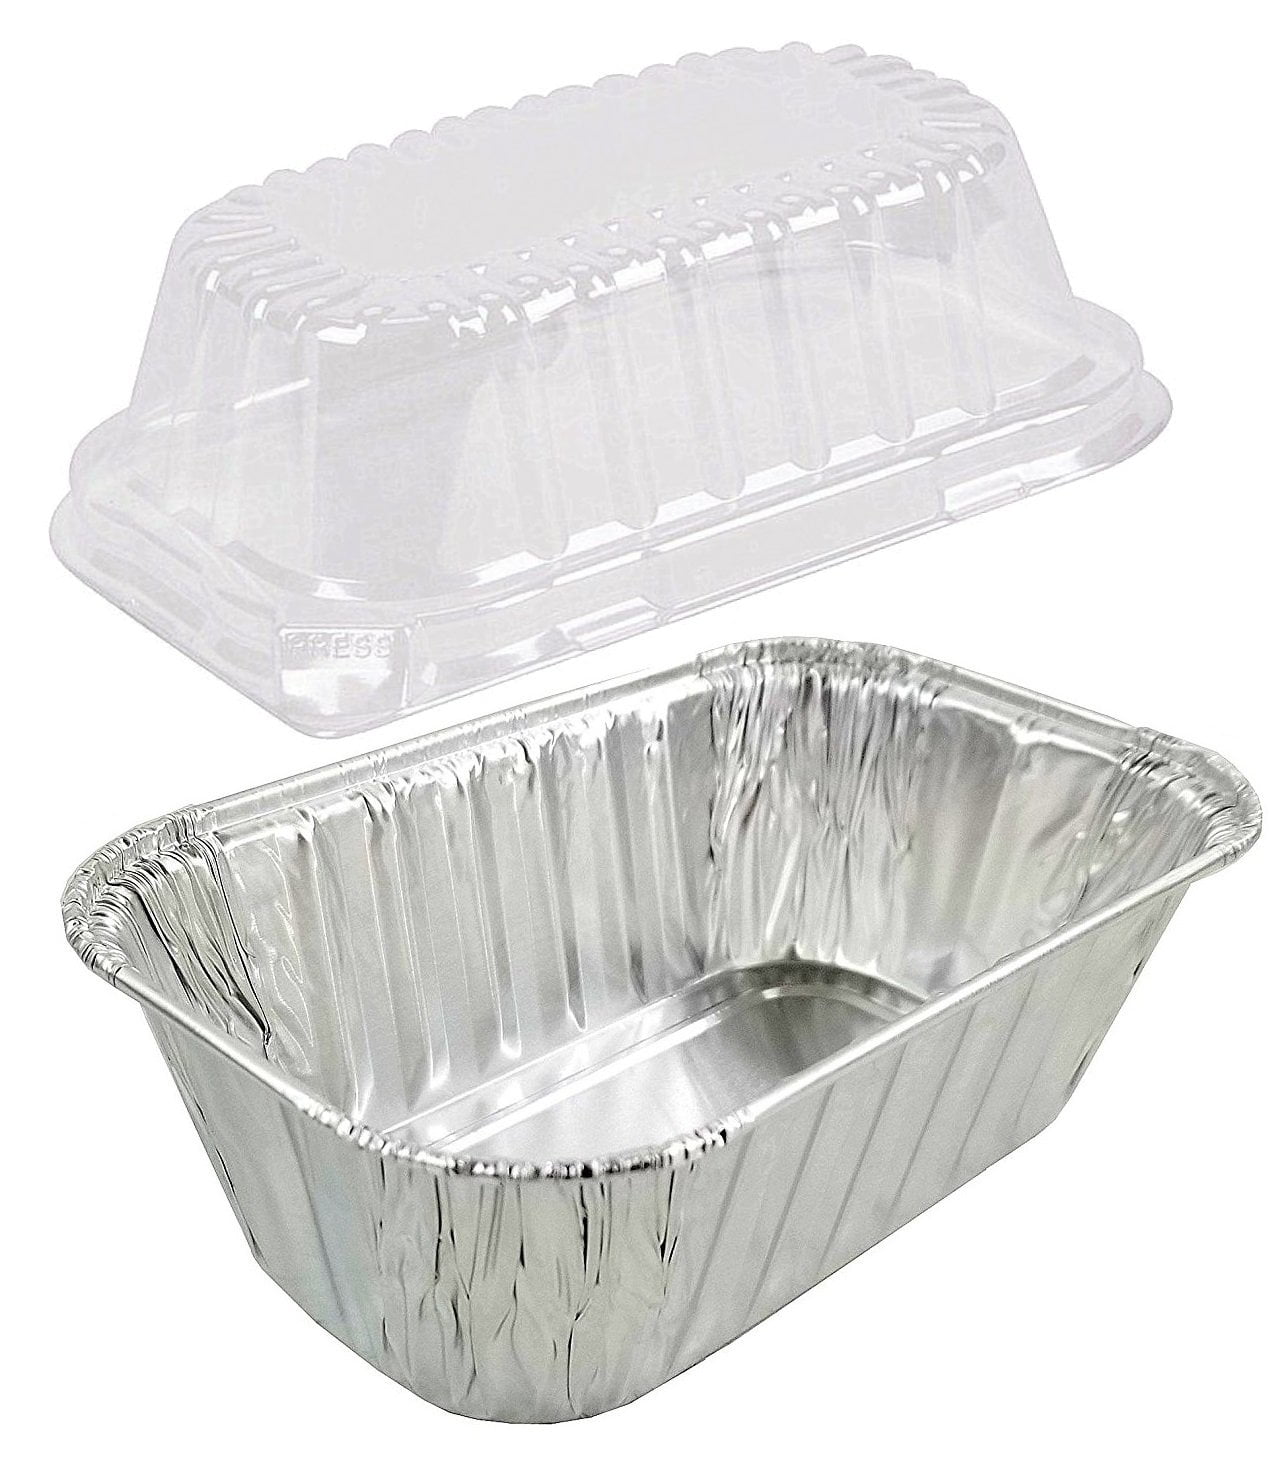 Aluminum Loaf Pans (Small, Medium and Large)